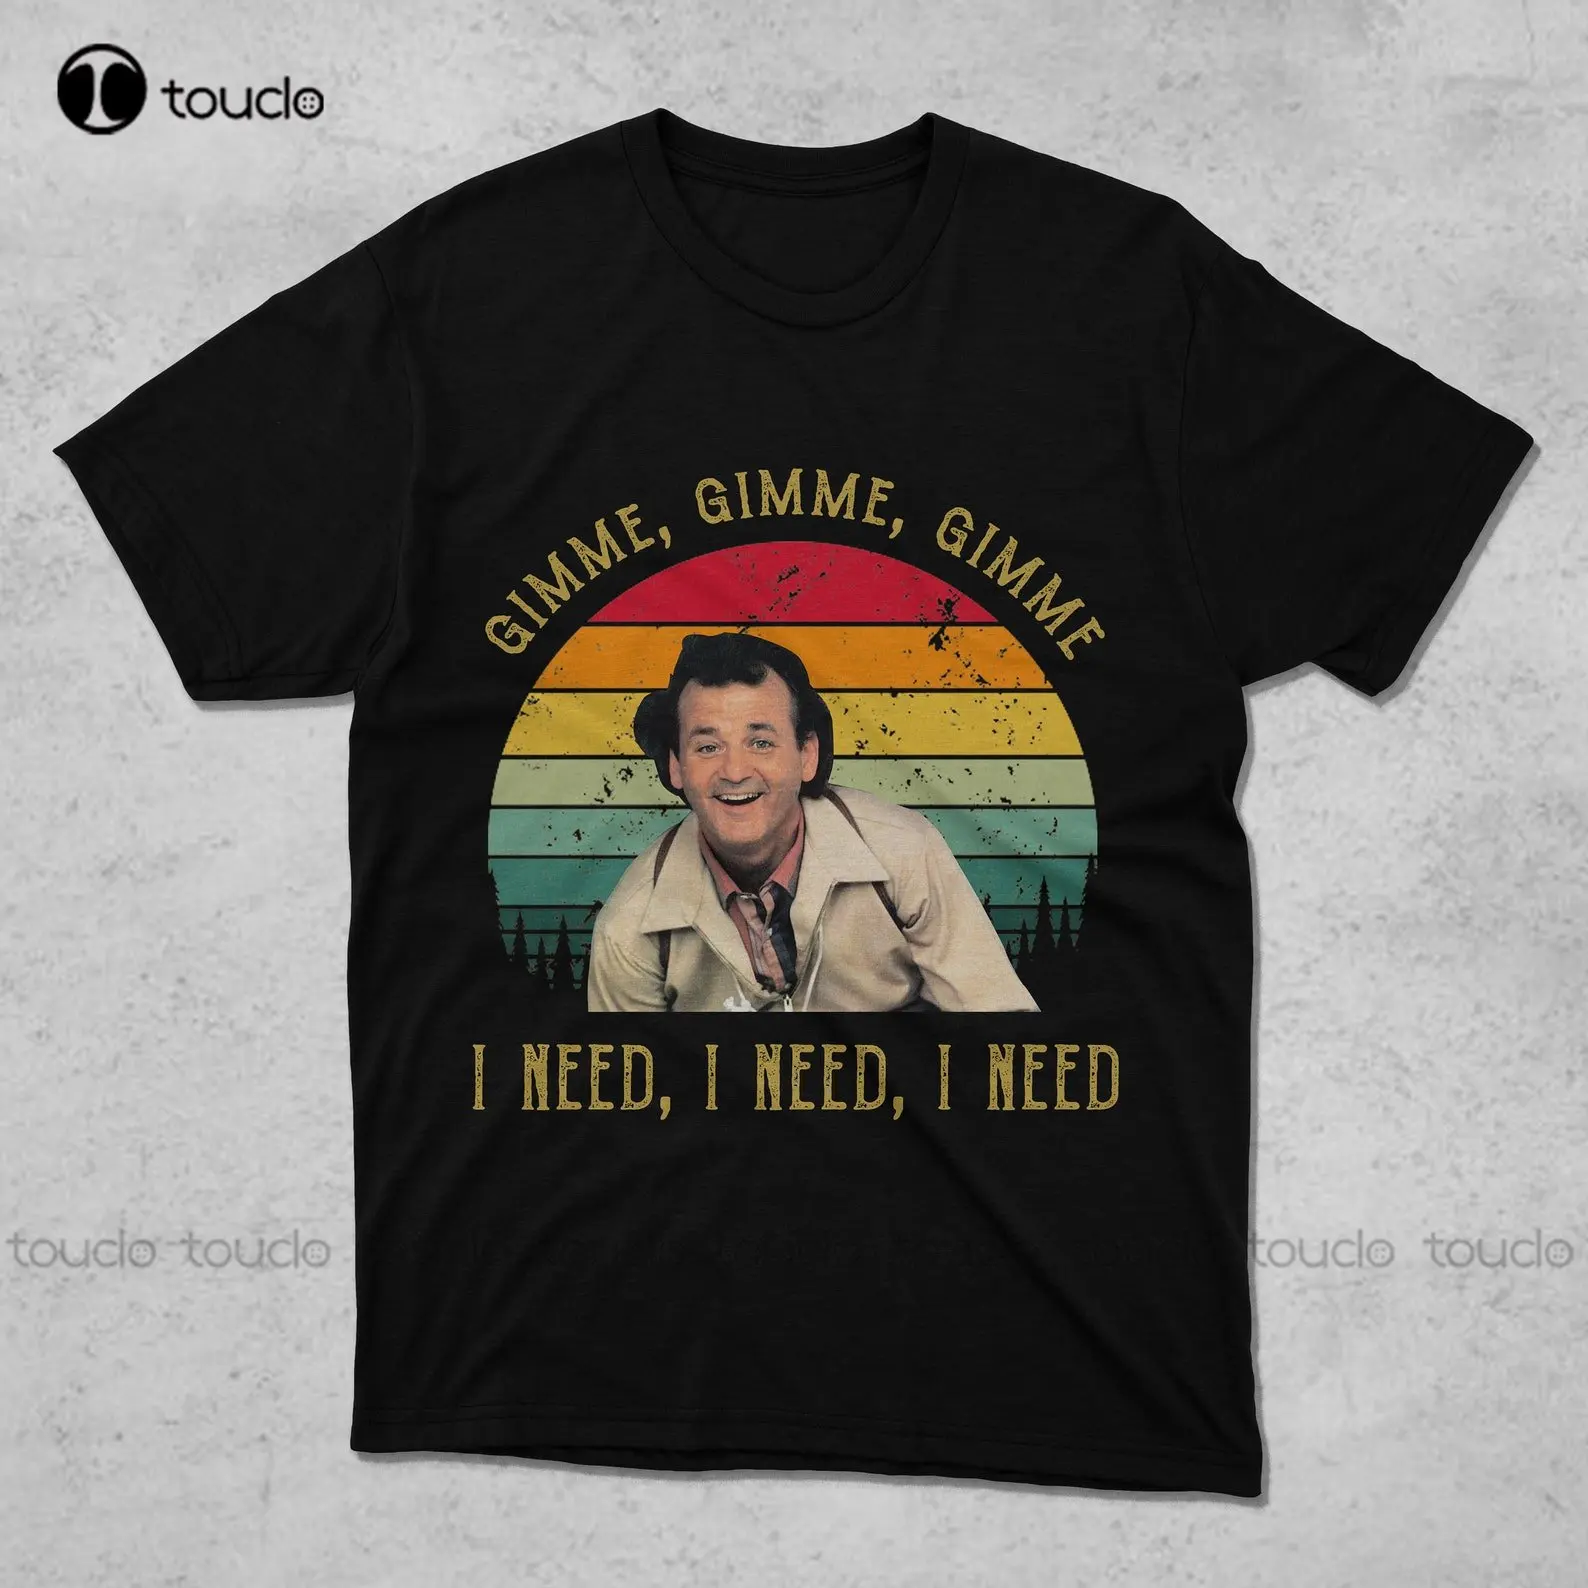 

Gimme Gimme Gimme I Need T-Shirt Retro Movie What About Bob Bill Murray T-Shirt Vintage Shirt Heavyweight T Shirts For Men